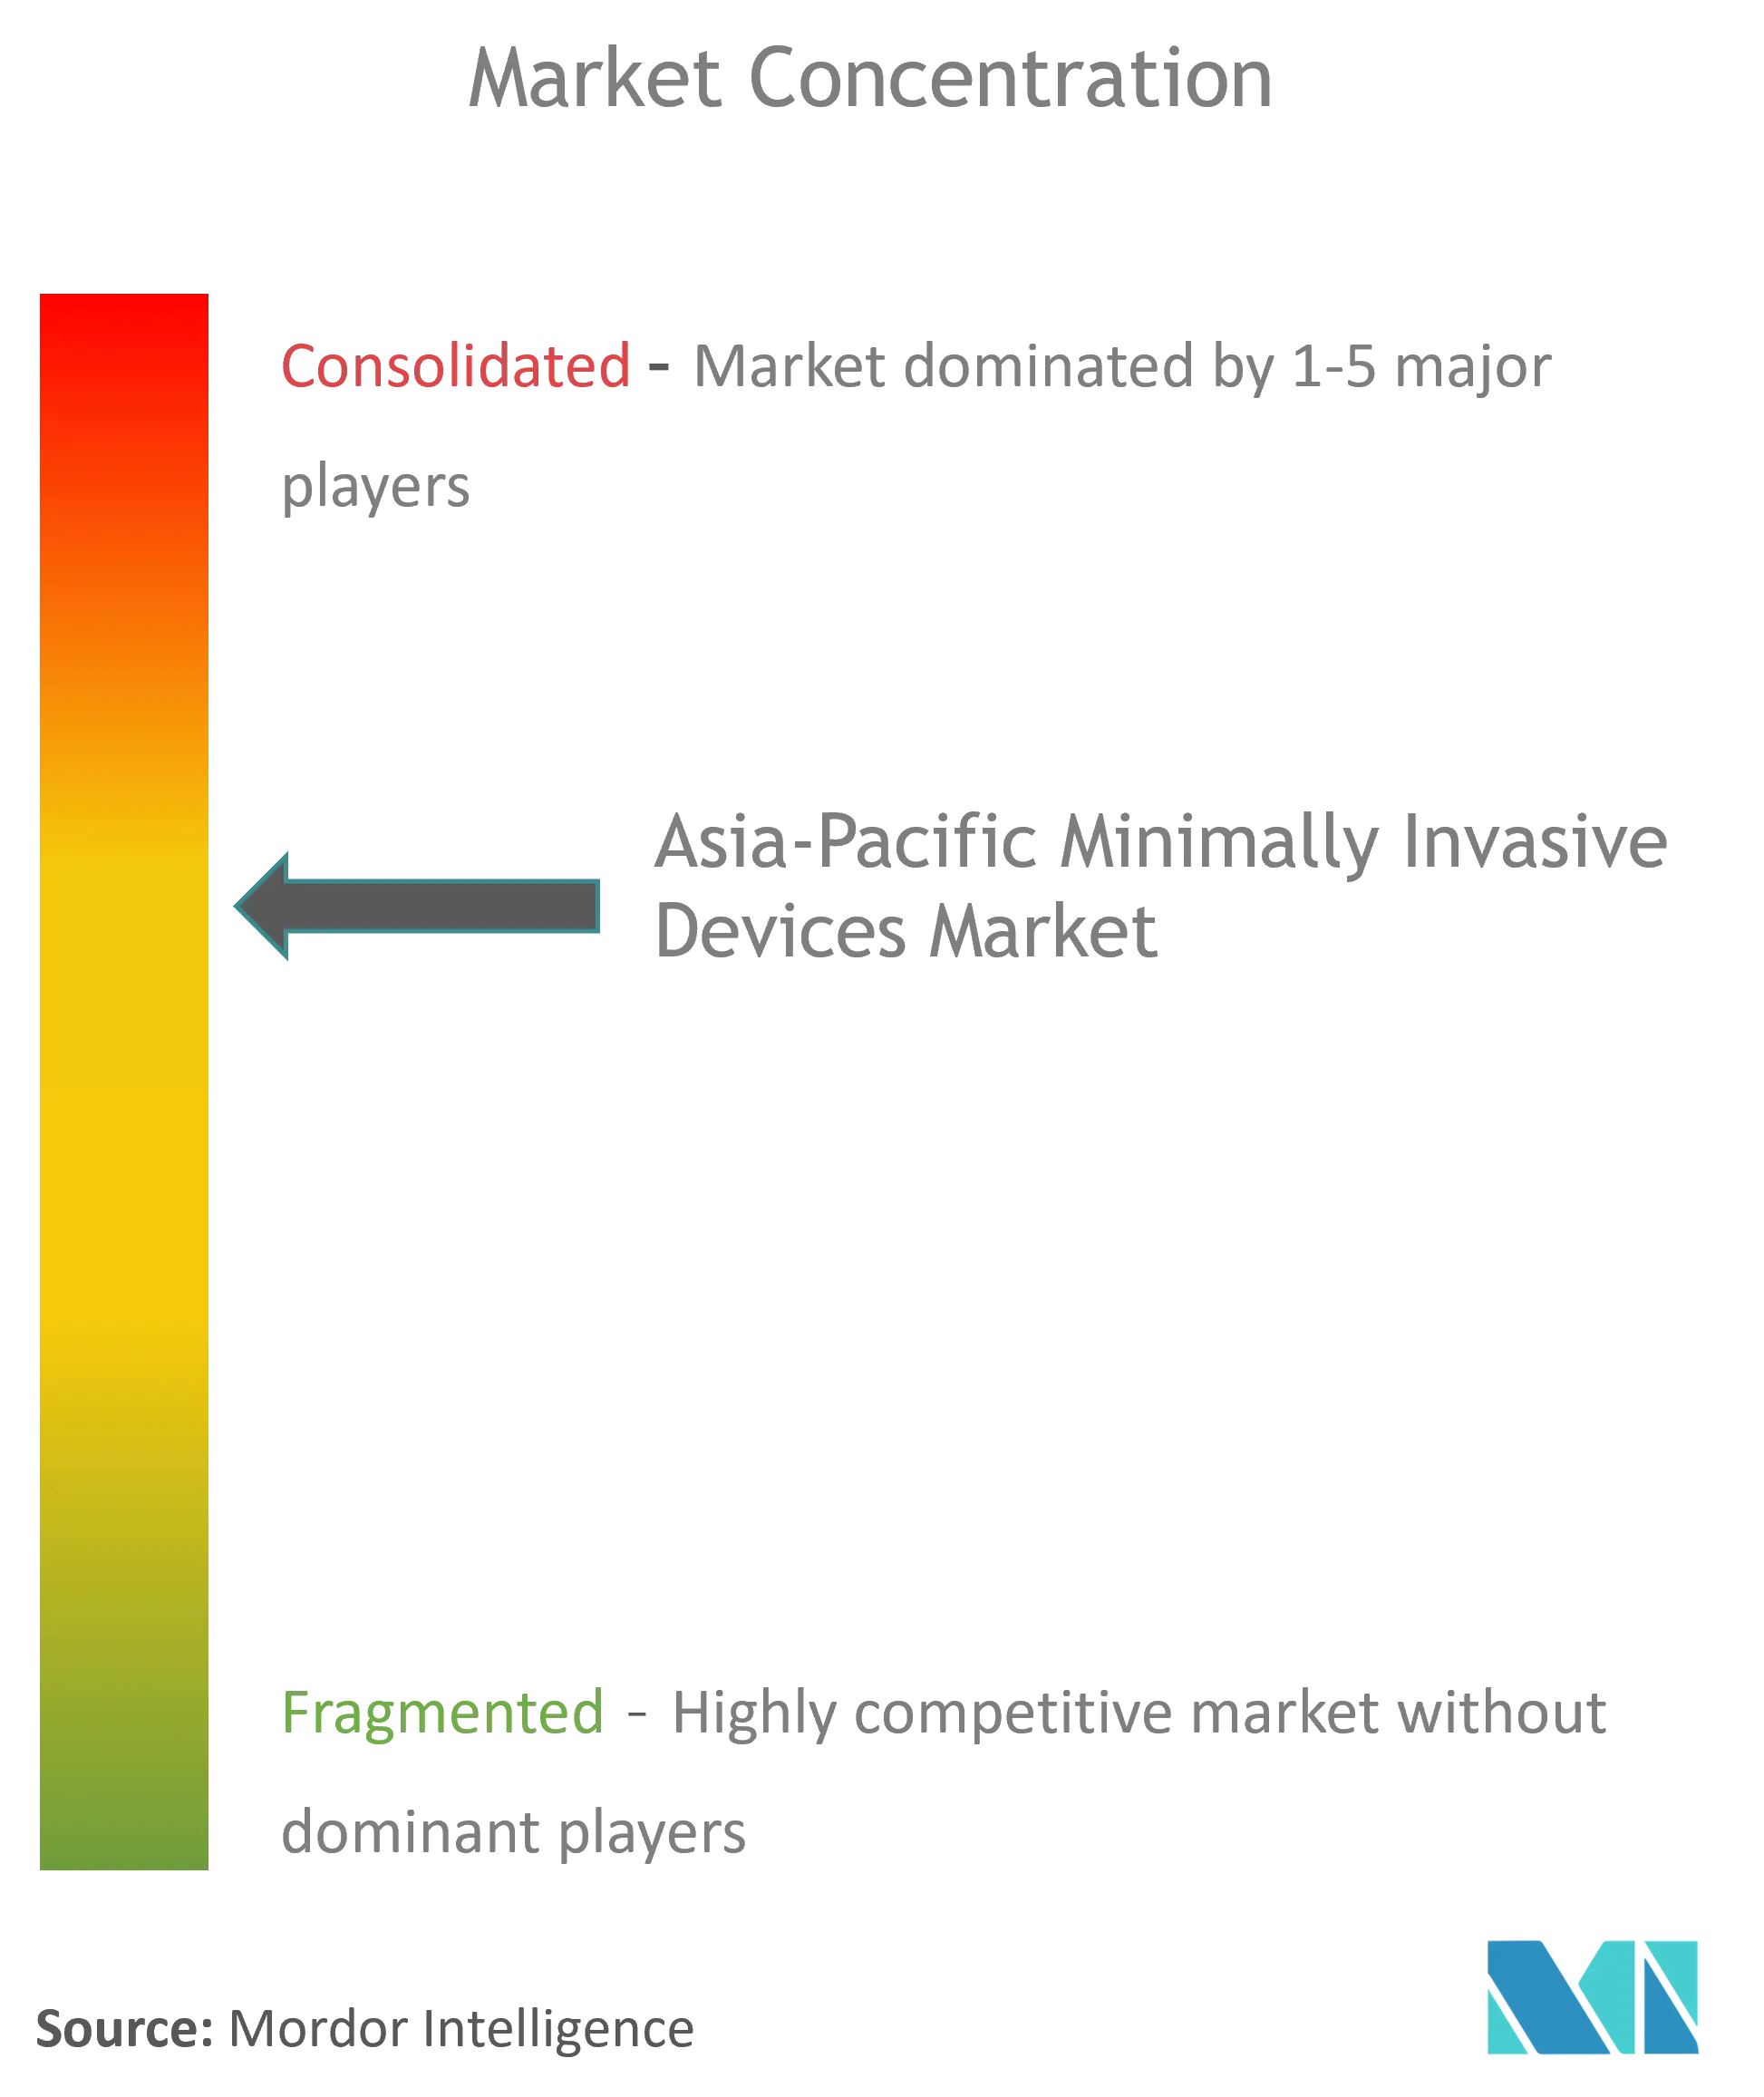 Asia-Pacific Minimally Invasive Devices Market  Concentration